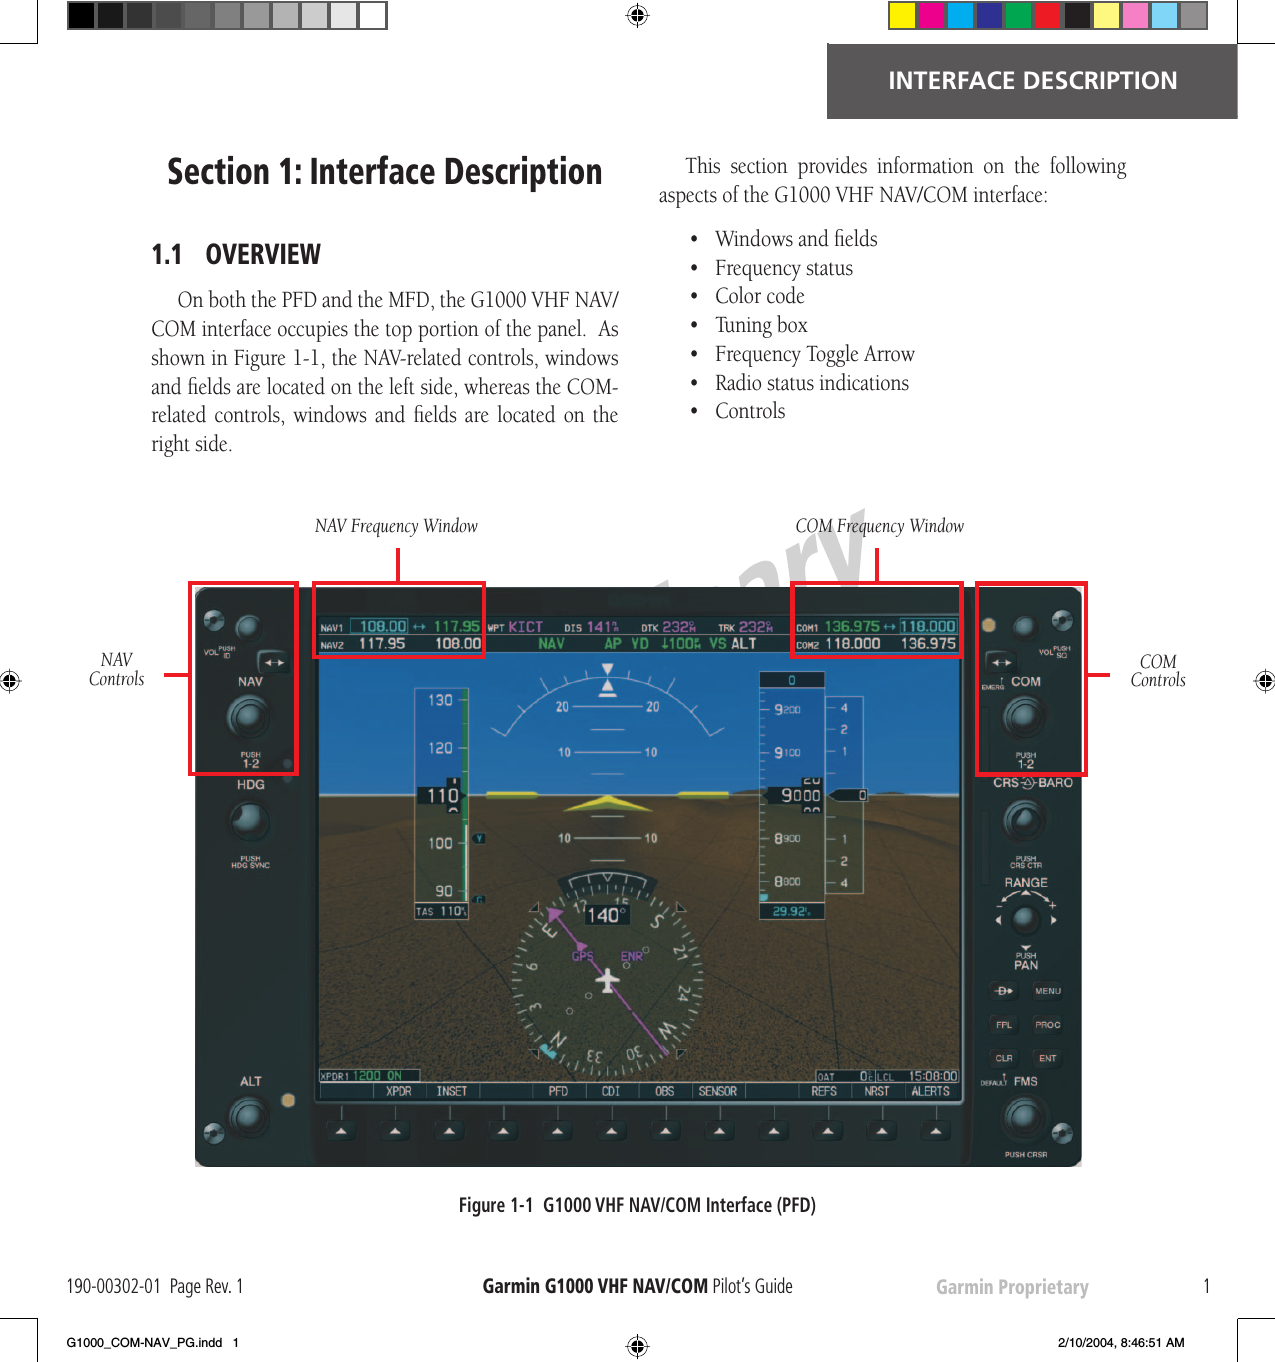 PreliminaryGarmin Proprietary 1INTERFACE DESCRIPTION190-00302-01  Page Rev. 1    Garmin G1000  VHF NAV/COM Pilot’s GuideSection 1:  Interface Description1.1 OVERVIEWOn both the  PFD and the  MFD, the G1000  VHF NAV/COM interface occupies the top portion of the panel.  As shown in Figure 1-1, the NAV-related controls, windows and ﬁ elds are located on the left side, whereas the COM-related controls, windows and ﬁ elds are located on the right side.This section provides information on the following aspects of the G1000  VHF NAV/COM interface:•   Windows and ﬁ elds•    Frequency status•     Color code•    Tuning box•    Frequency Toggle Arrow•    Radio status indications•    ControlsNAV Controls COM Controls NAV Frequency Window  COM Frequency WindowFigure 1-1  G1000  VHF NAV/COM Interface ( PFD)G1000_COM-NAV_PG.indd   1 2/10/2004, 8:46:51 AM